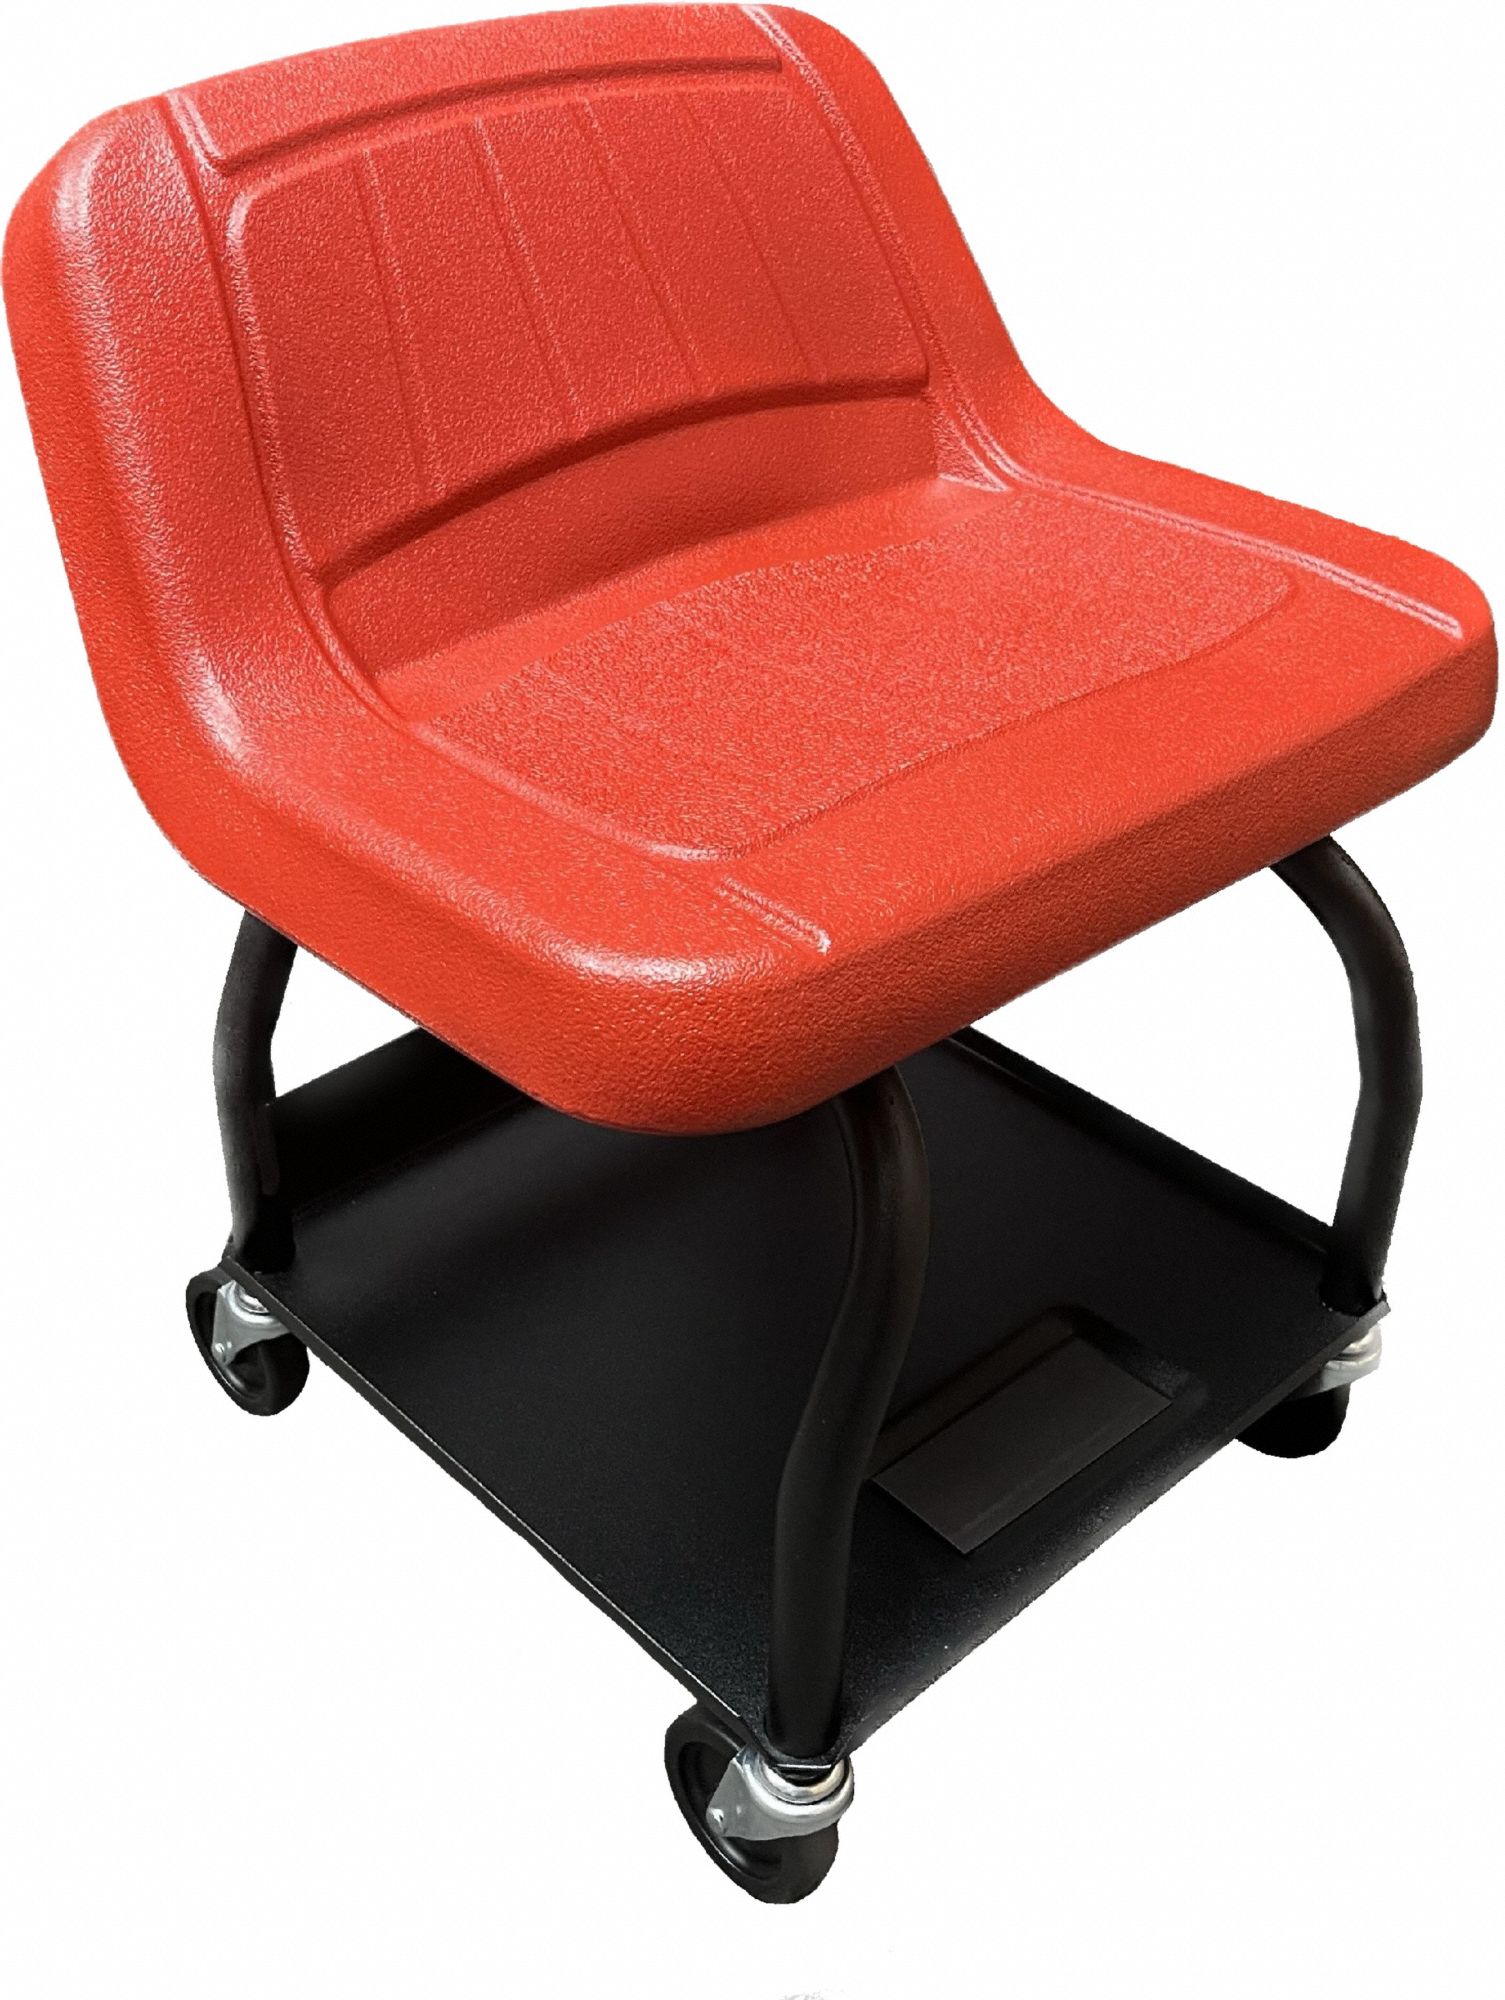 Mechanic Seat: Heavy-Duty, Fixed, 480 lb Max Load Capacity, 17 in Seat Ht, 17 in Overall Ht